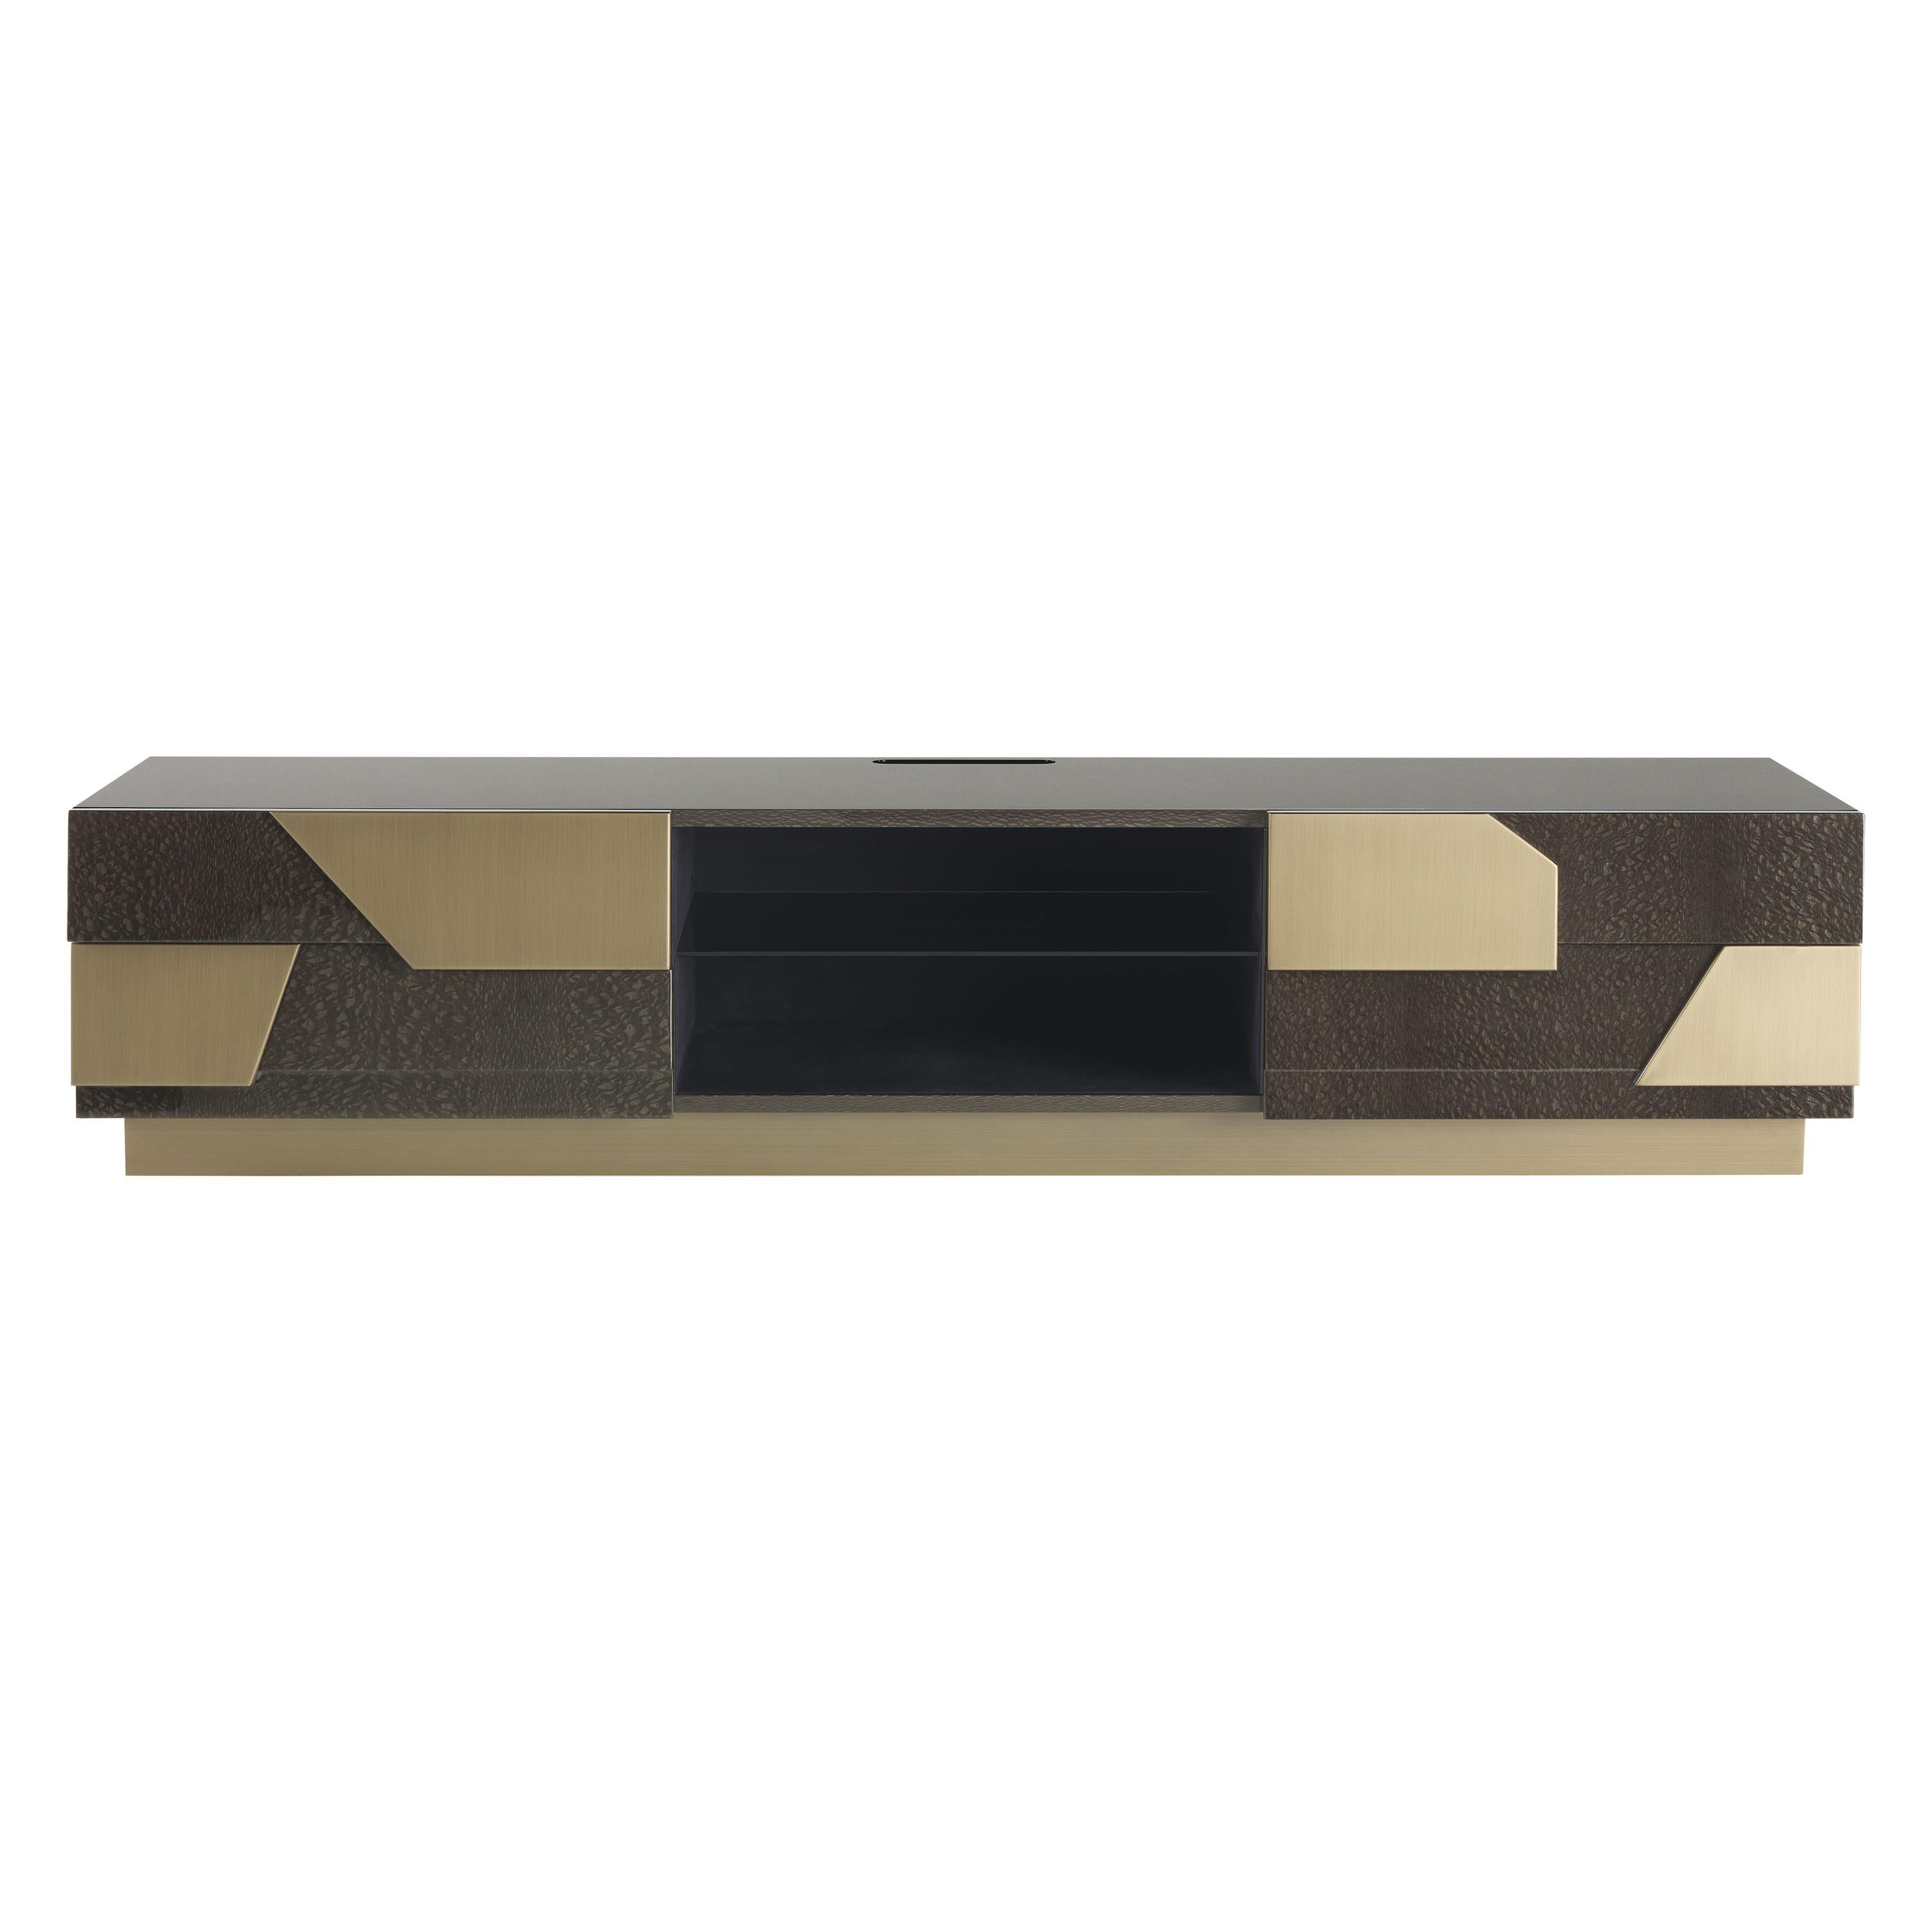 21st Century Vaal TV Holder in Carbalho by Roberto Cavalli Home Interiors